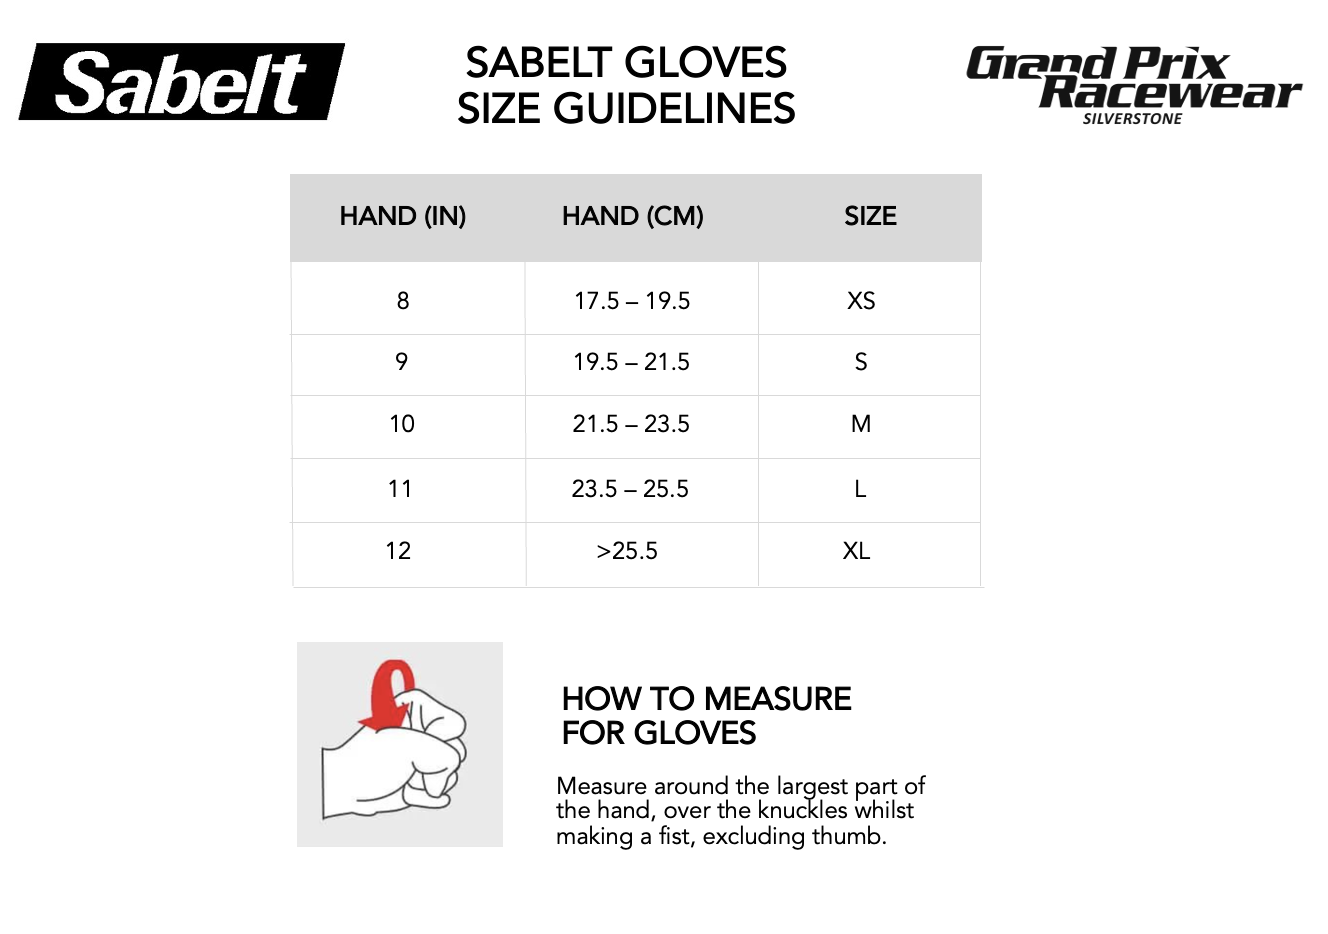 Size Guide for Sabelt Race Gloves available from www.gprdirect.com